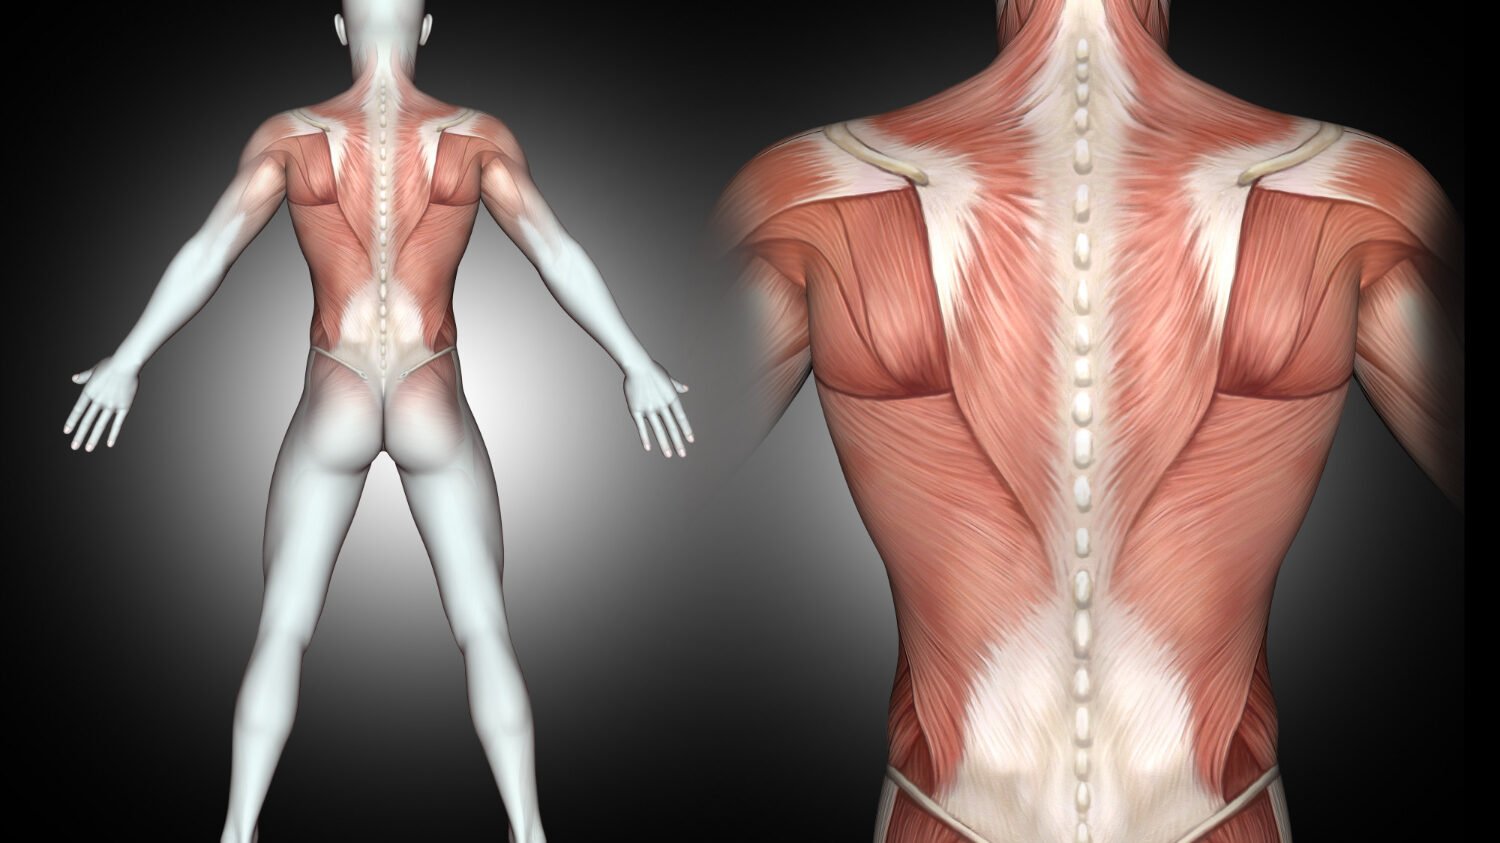 3D Male Medical Figure With Back Muscles Highlighted